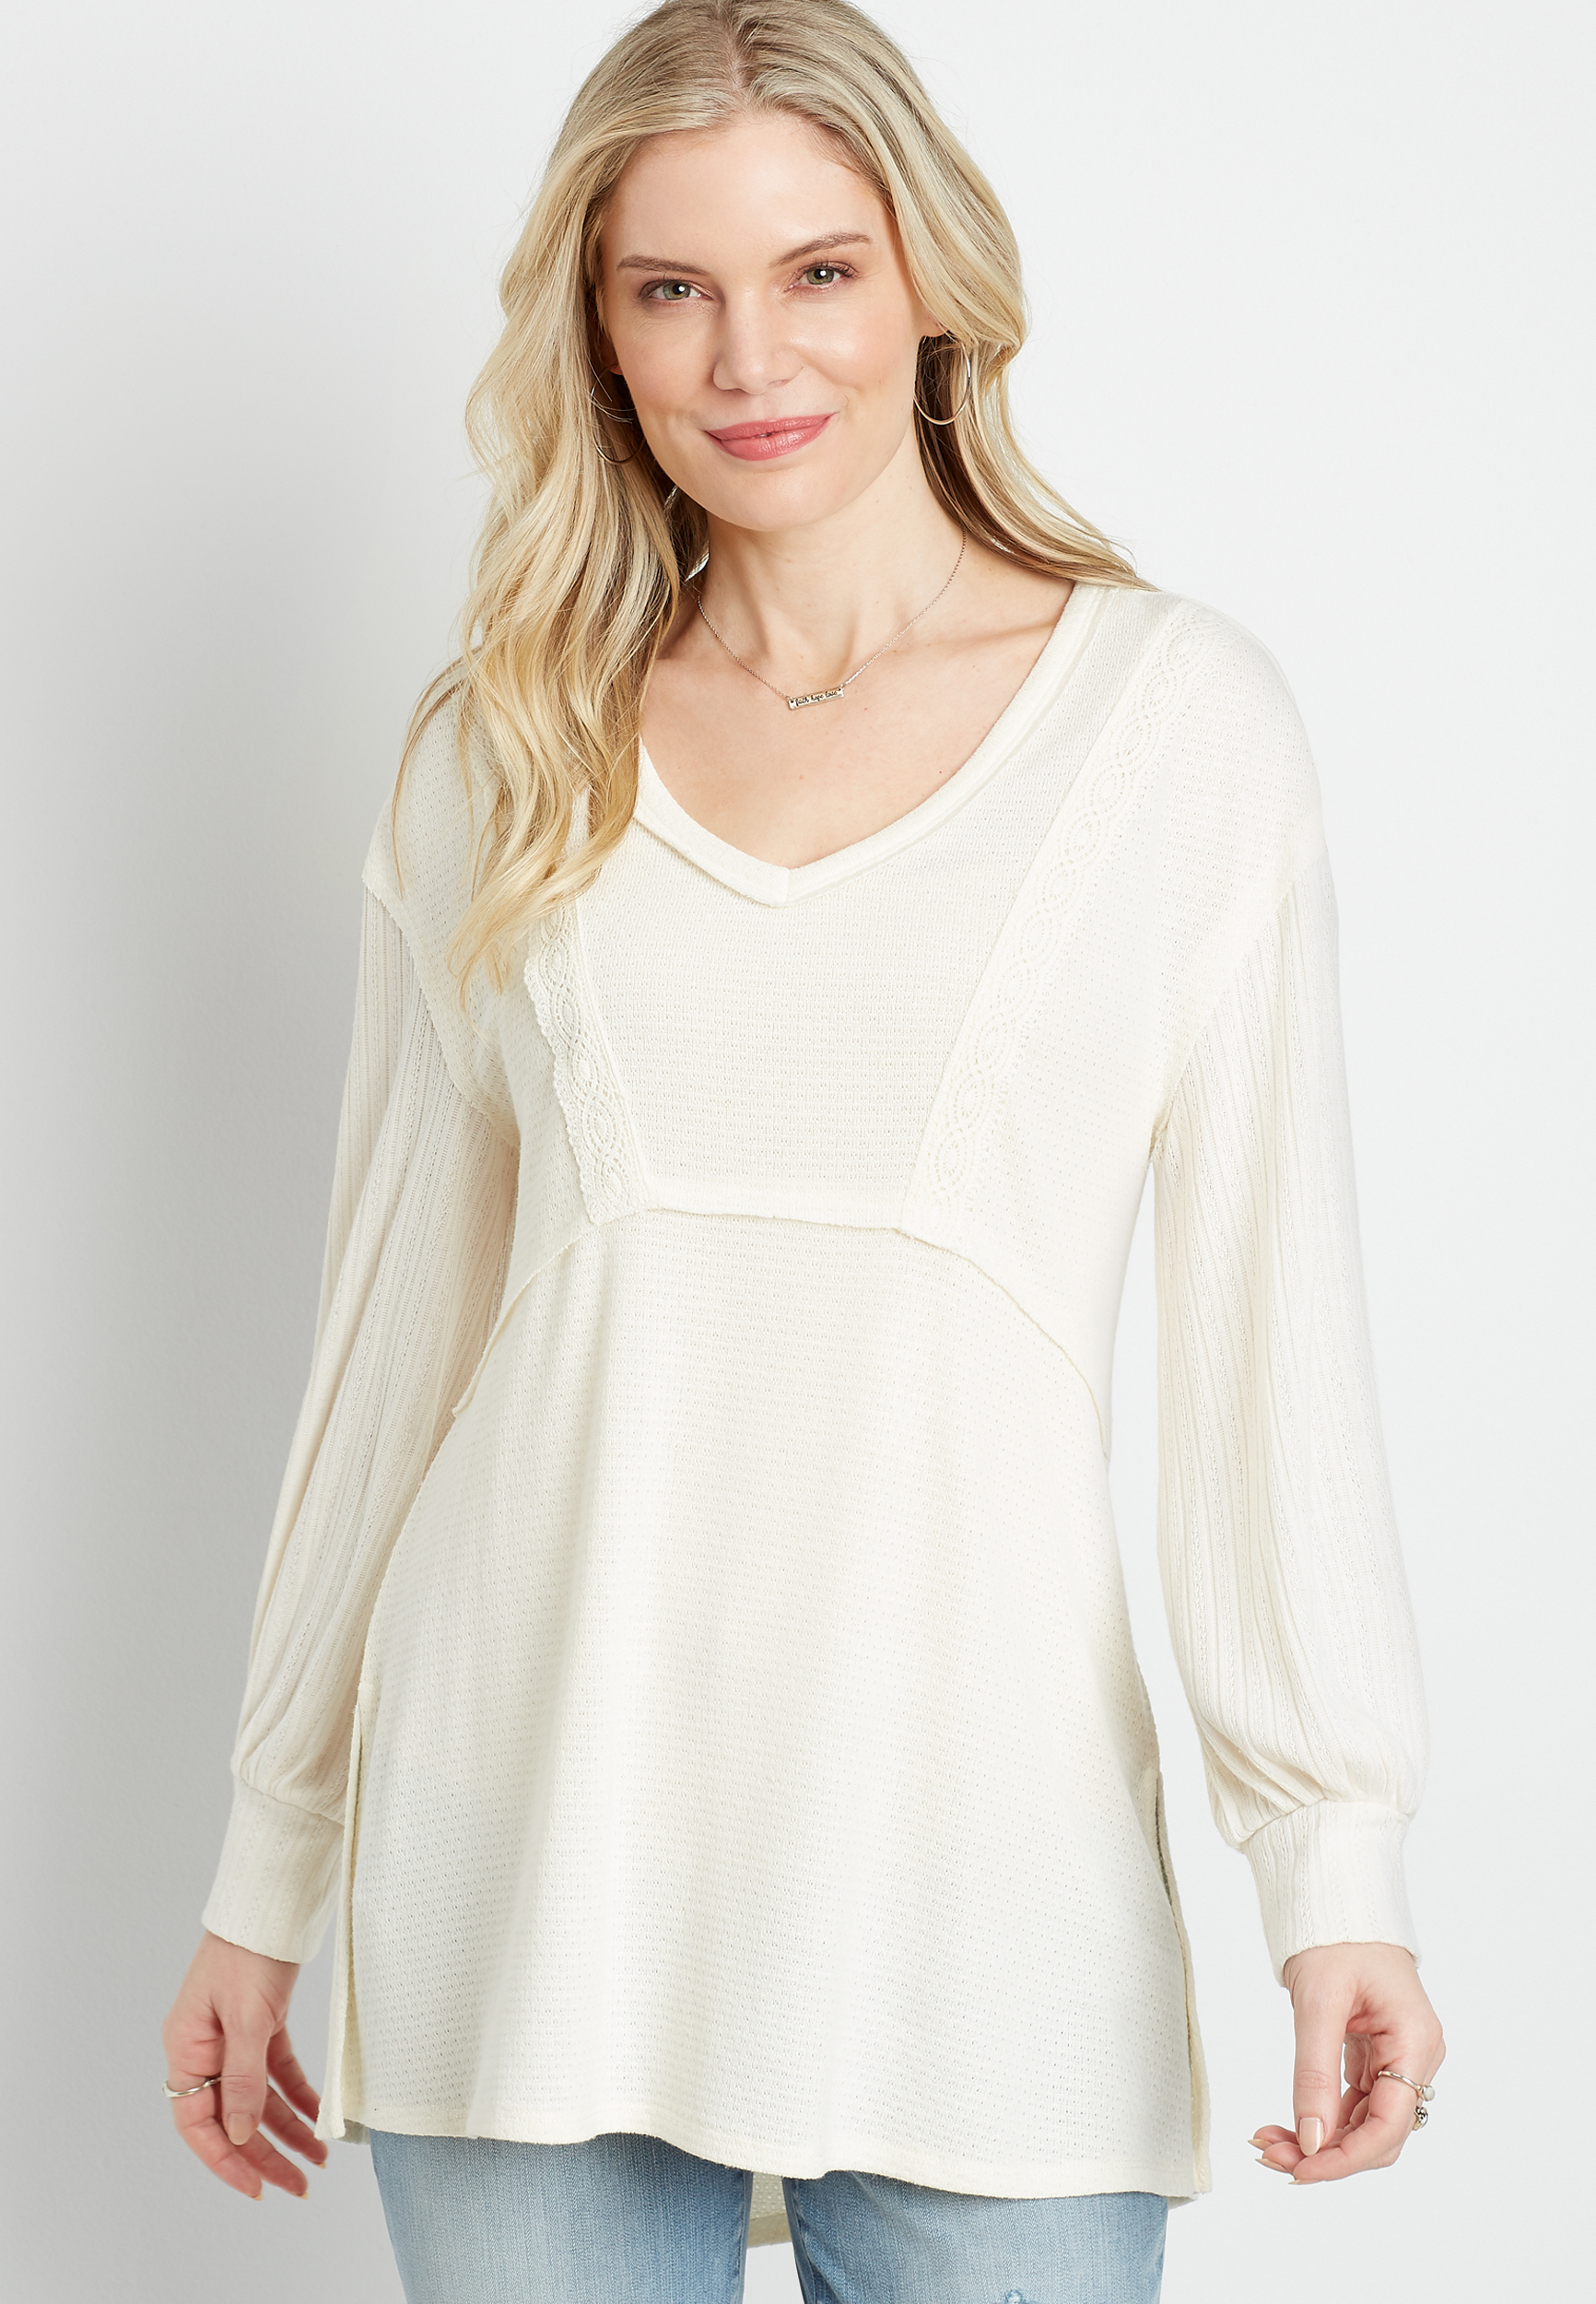 Solid Crochet Trim Blouson Sleeve Tunic Top | maurices